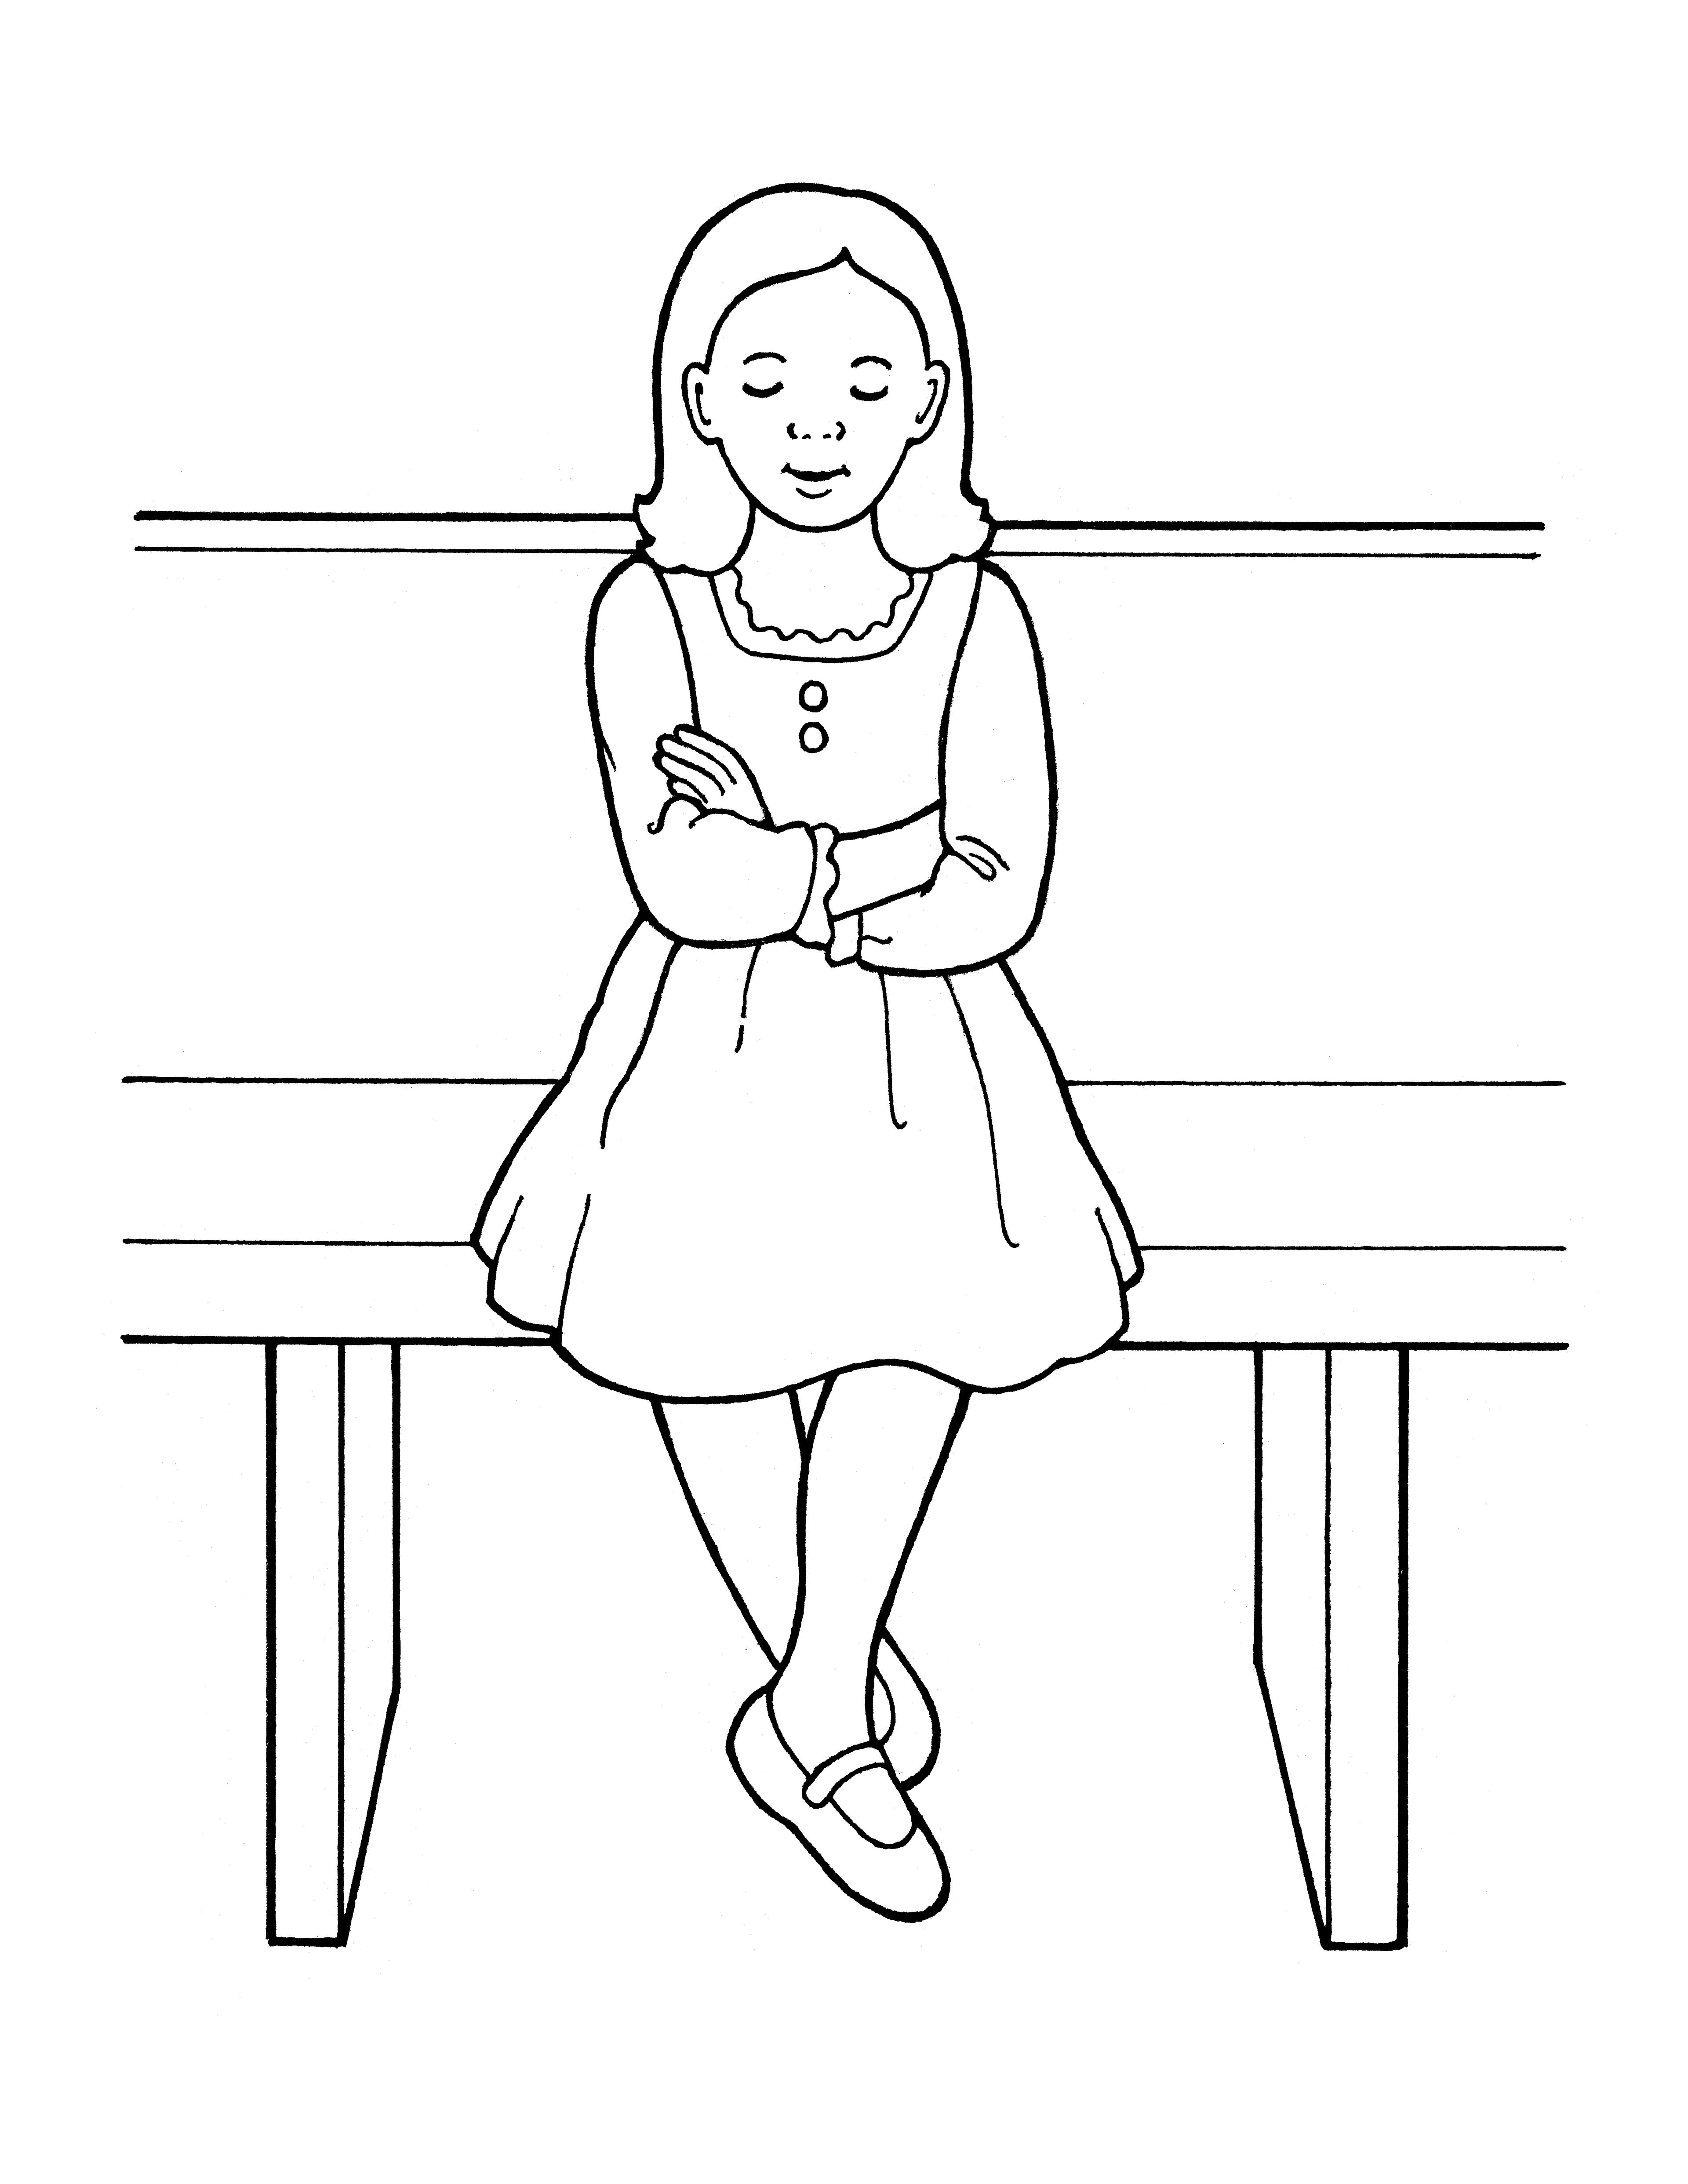 An illustration of a young girl folding her arms during the sacrament, from the nursery manual Behold Your Little Ones (2008), page 115.